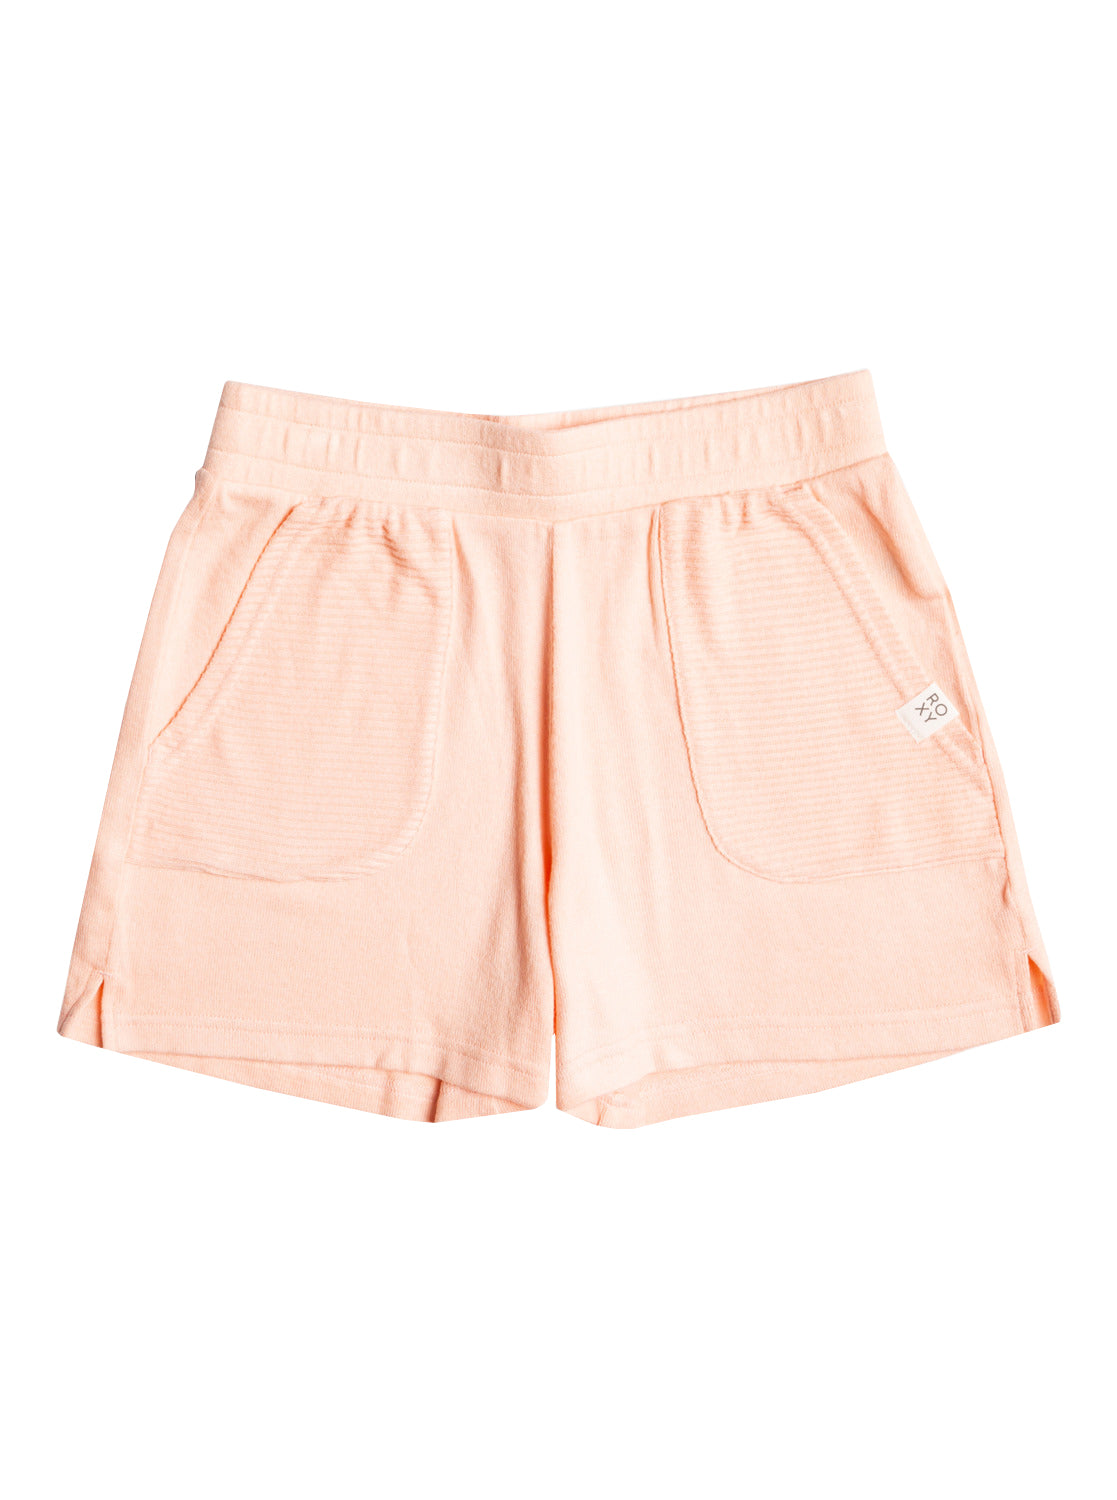 Roxy All The Little Lights Shorts MDR0 10/M